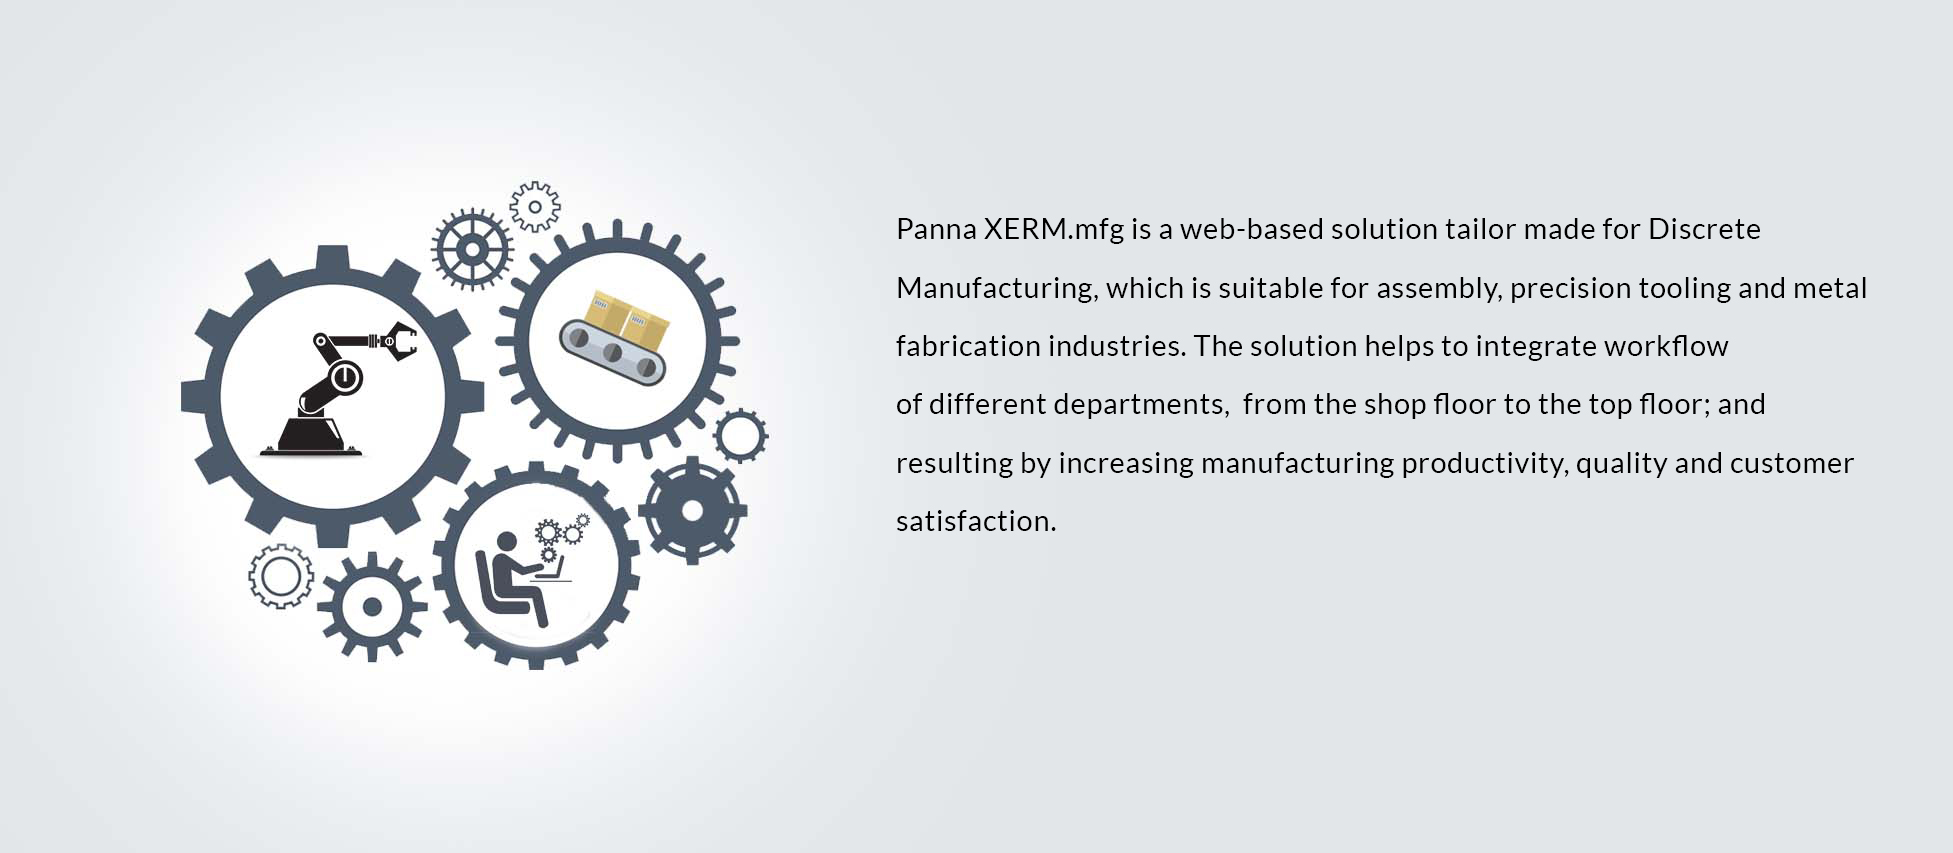 Panna XERM.mfg is a web-based solution tailor made for Discrete Manufacturing, which is suitable for assembly, precision tooling and metal fabrication industries. The solution helps to integrate workflow 
of different departments,  from the shop floor to the top floor; and resulting by increasing manufacturing productivity, quality and customer satisfaction. 